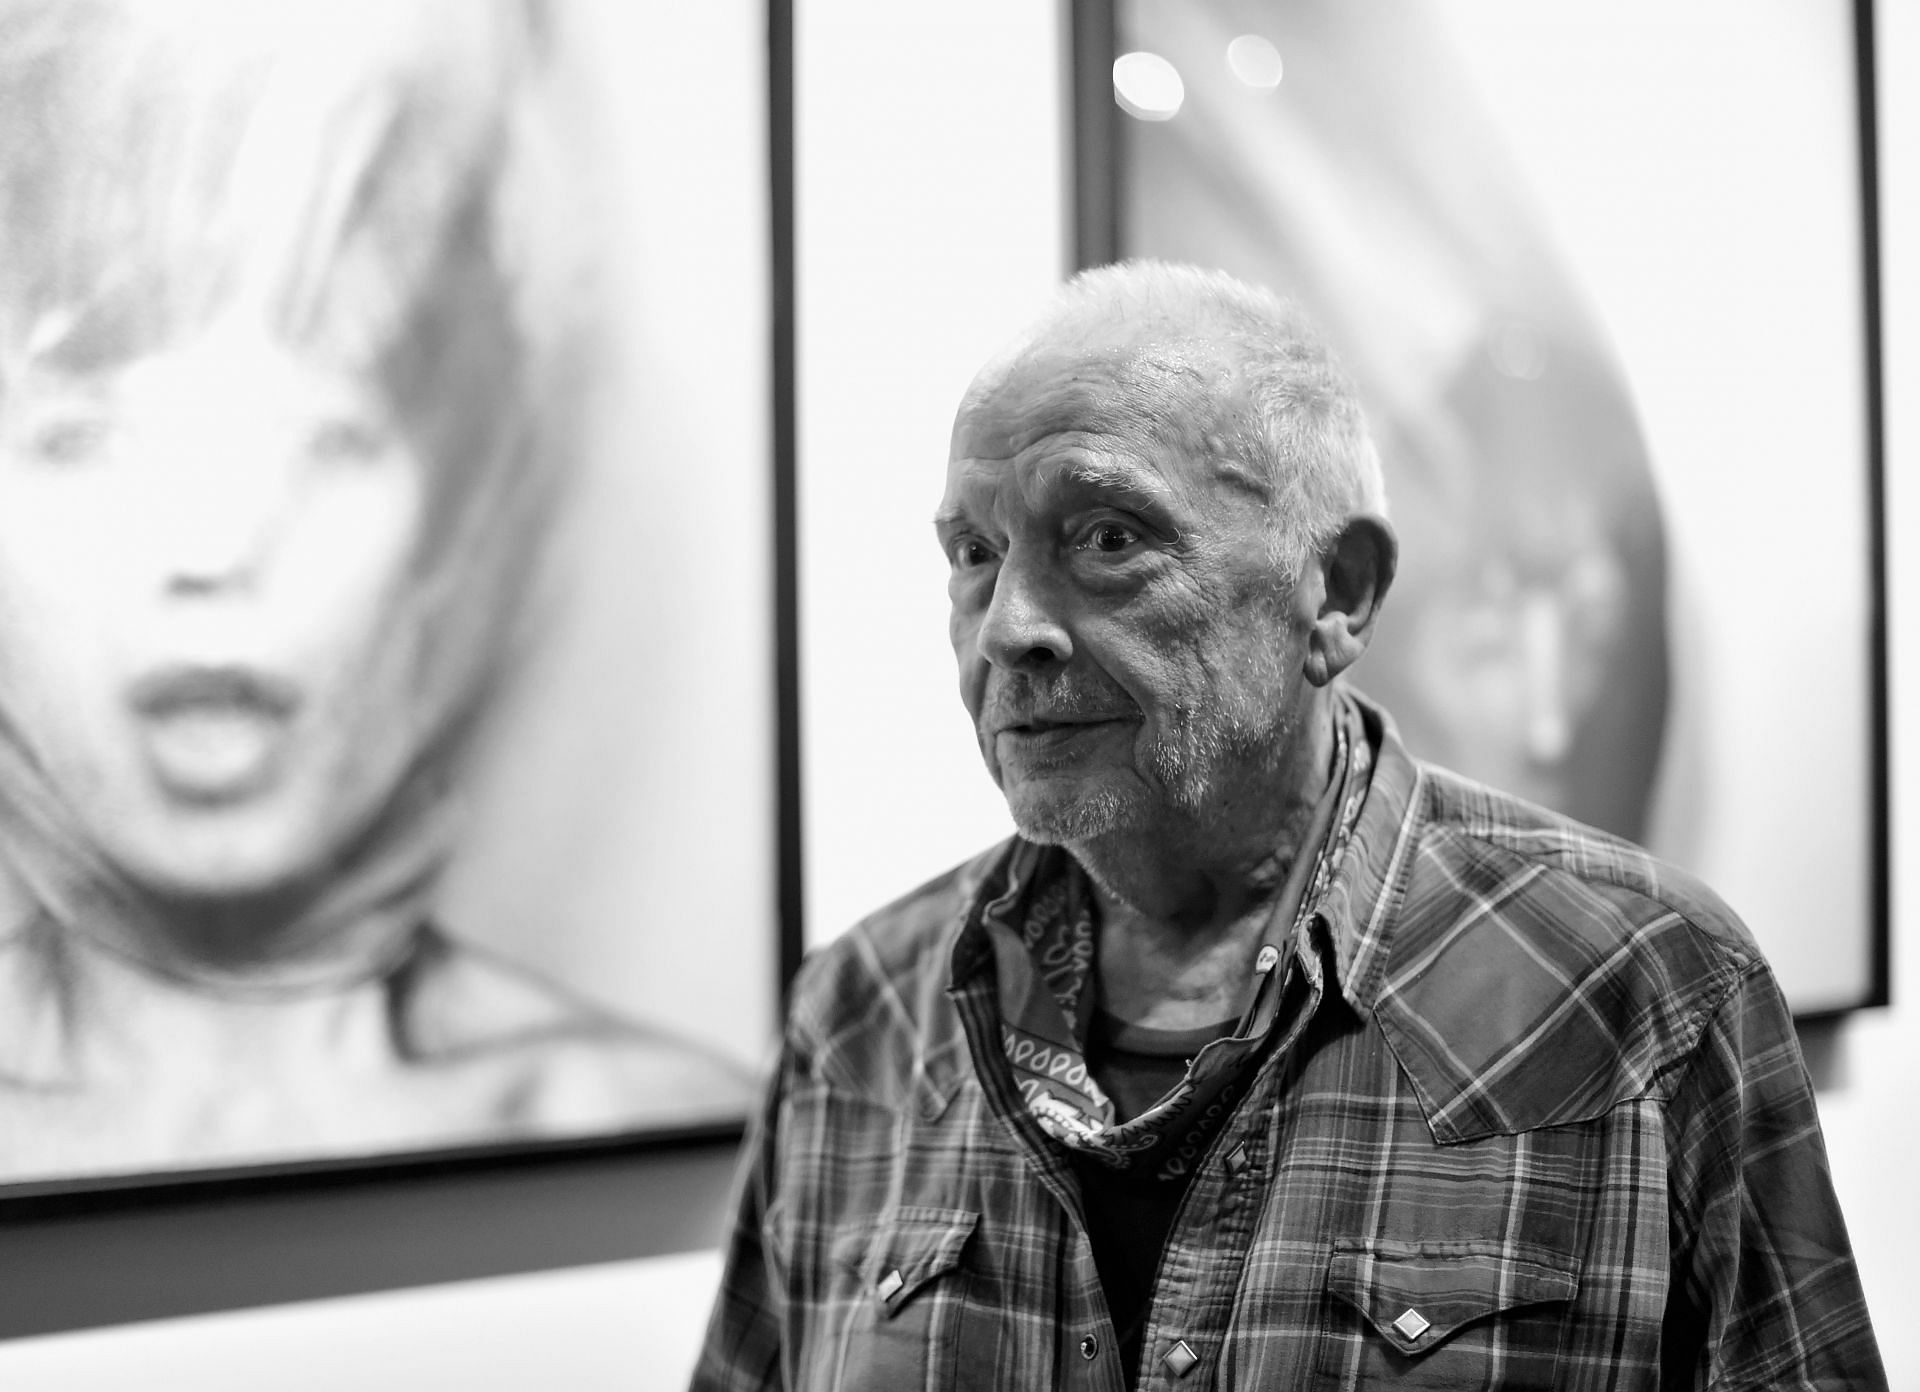 David Bailey At The TASCHEN Gallery (Image by Getty Images/Frazer Harrison)